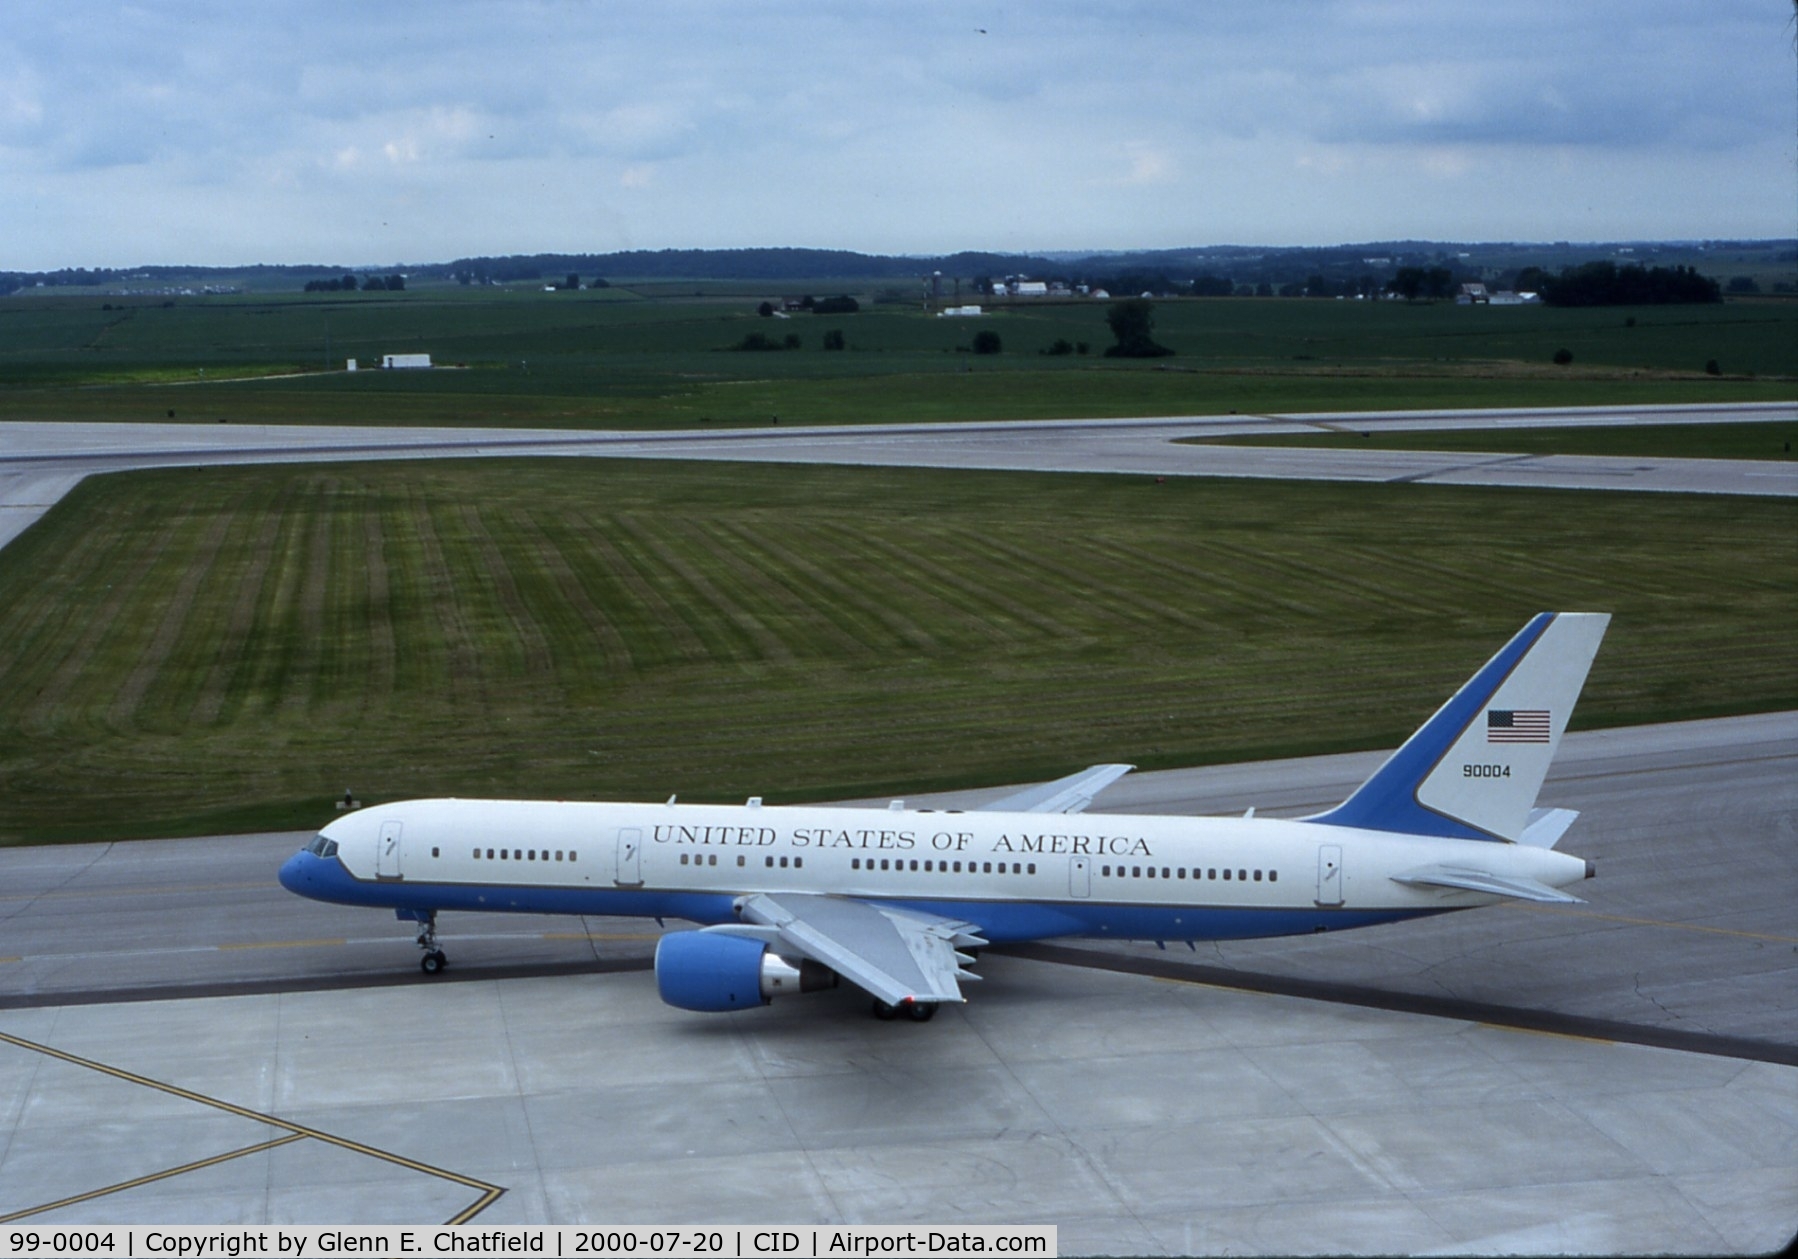 99-0004, 1999 Boeing VC-32A (757-2GA) C/N 29028, VC-32A taxiing out for departure